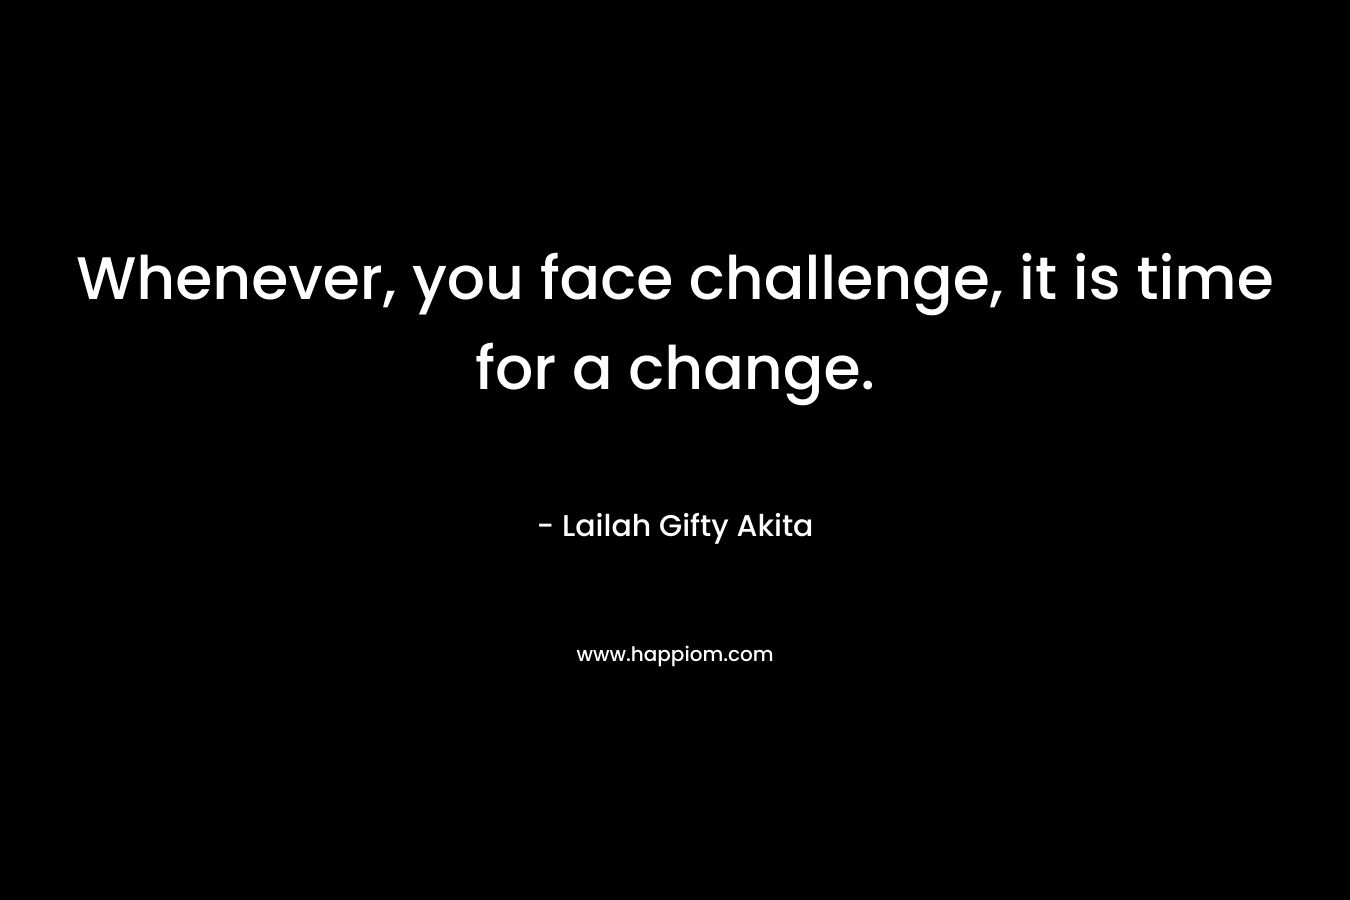 Whenever, you face challenge, it is time for a change.